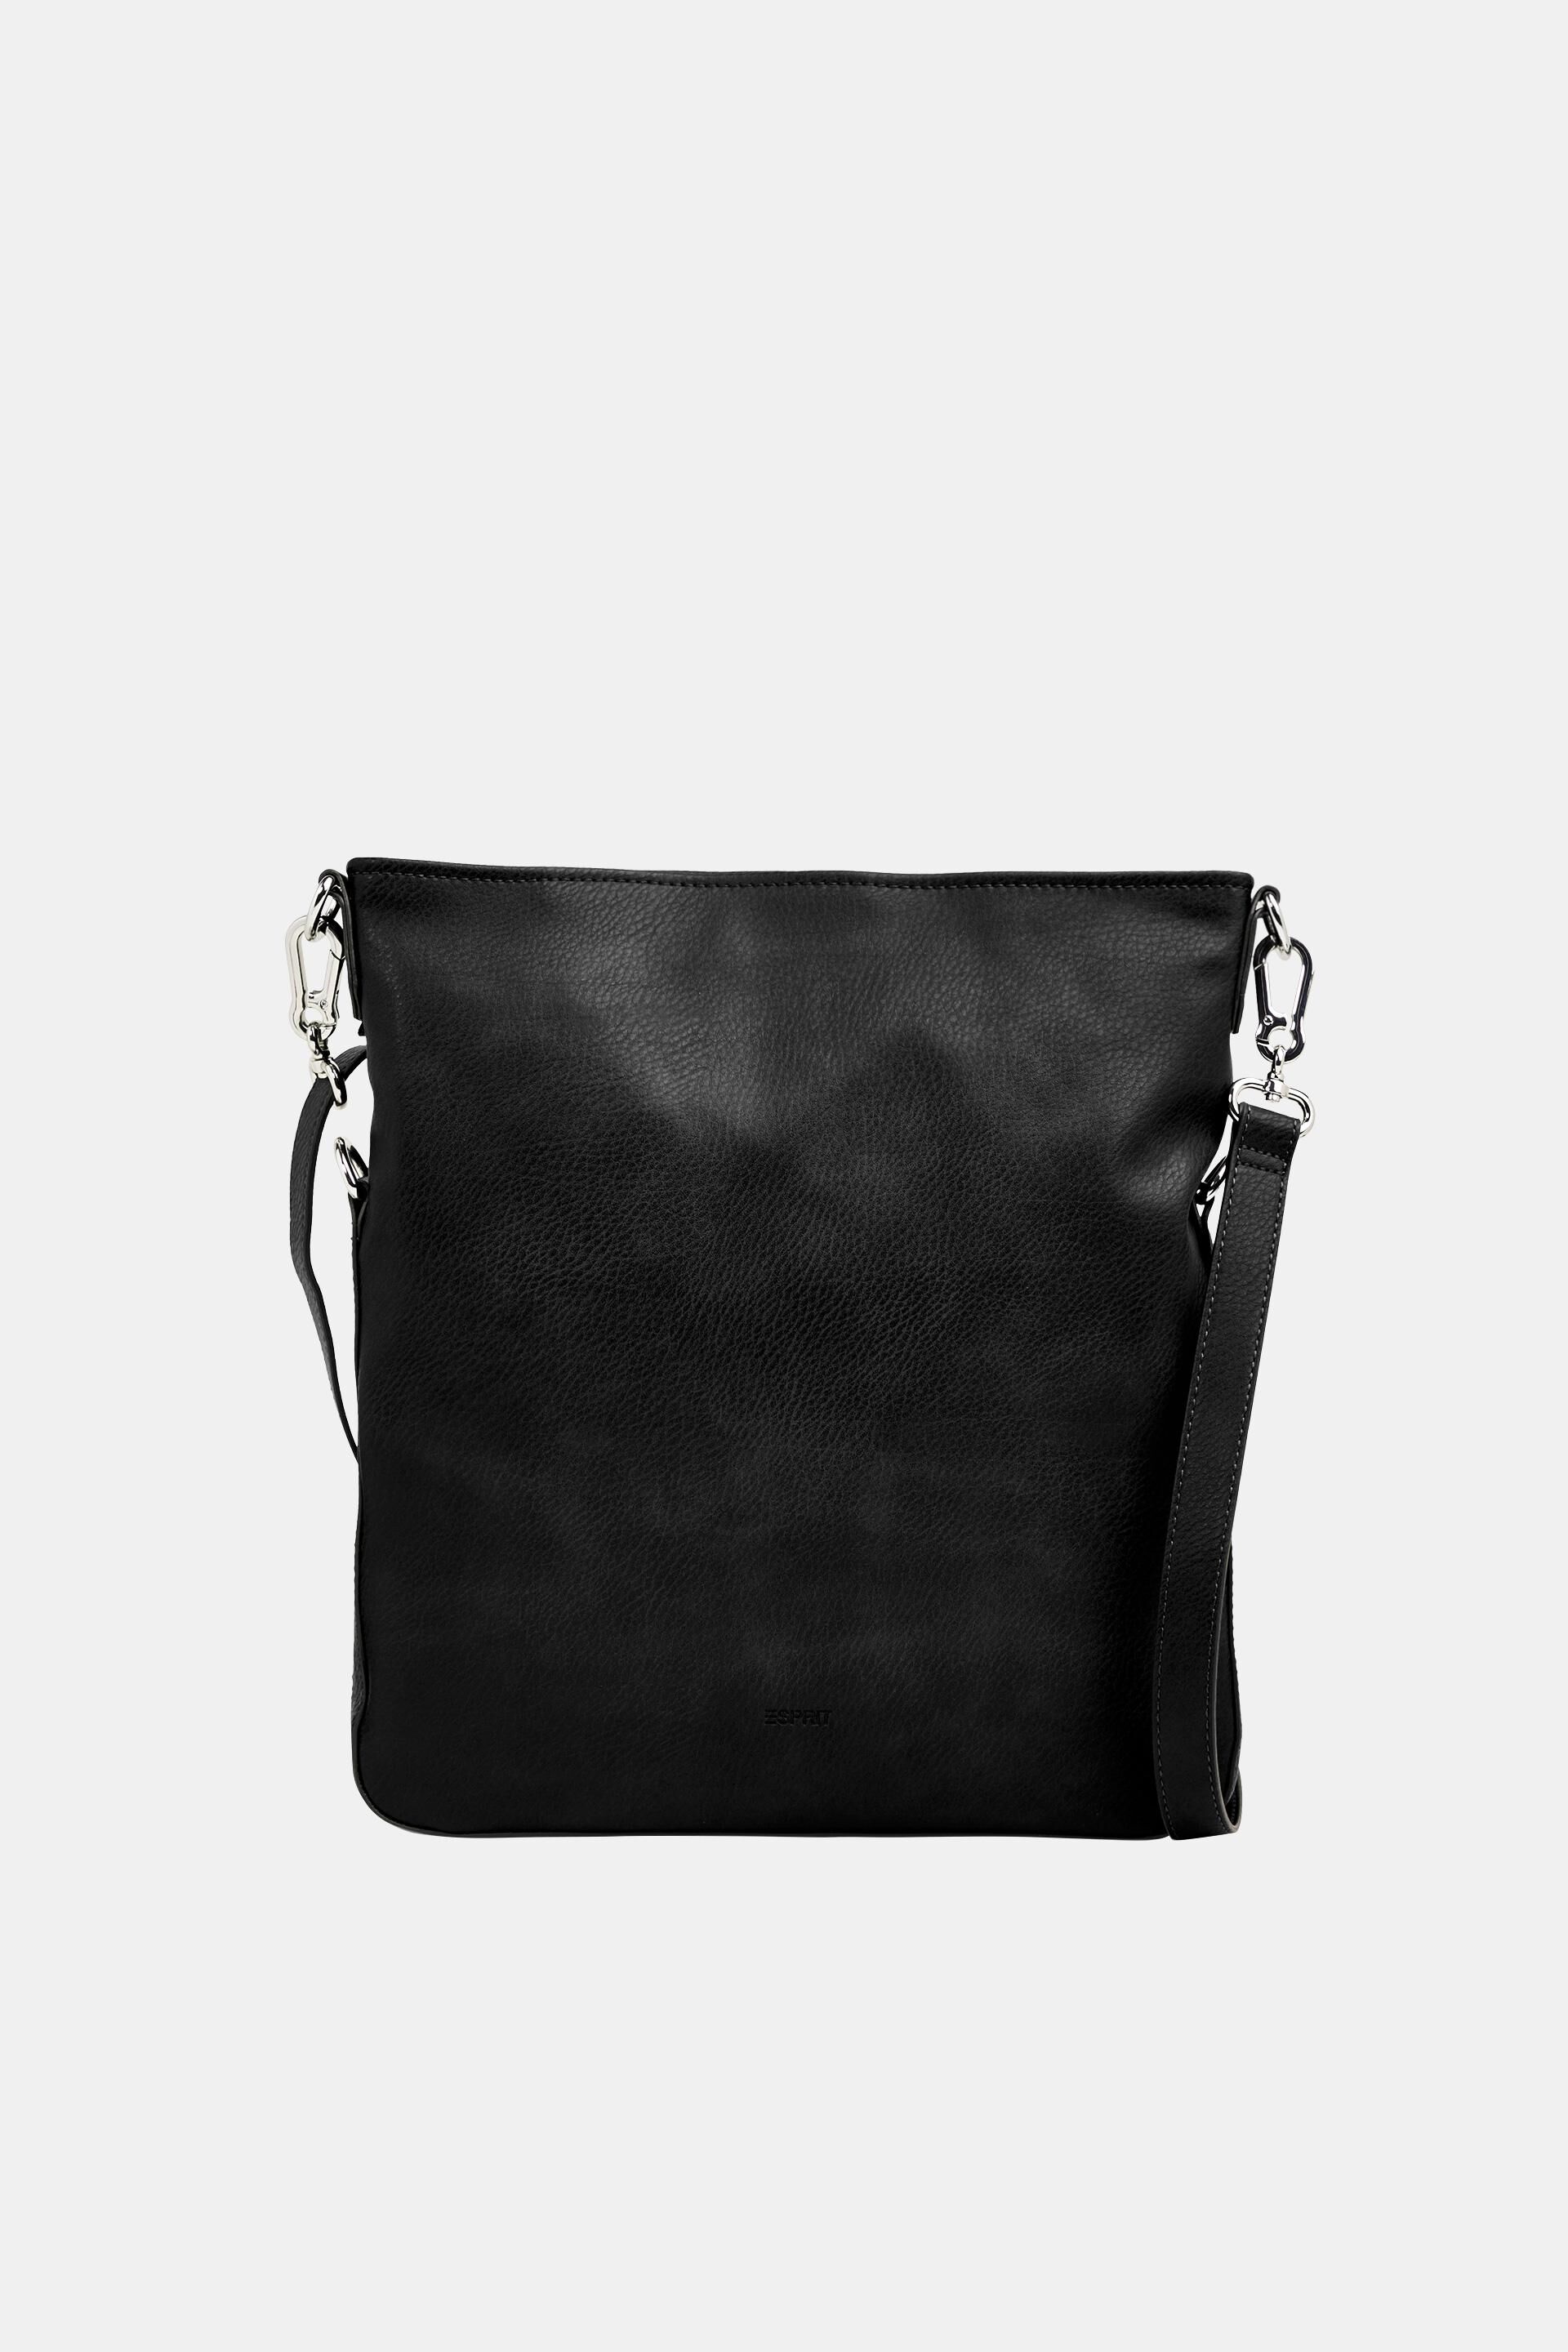 Esprit bag in leather Flapover faux